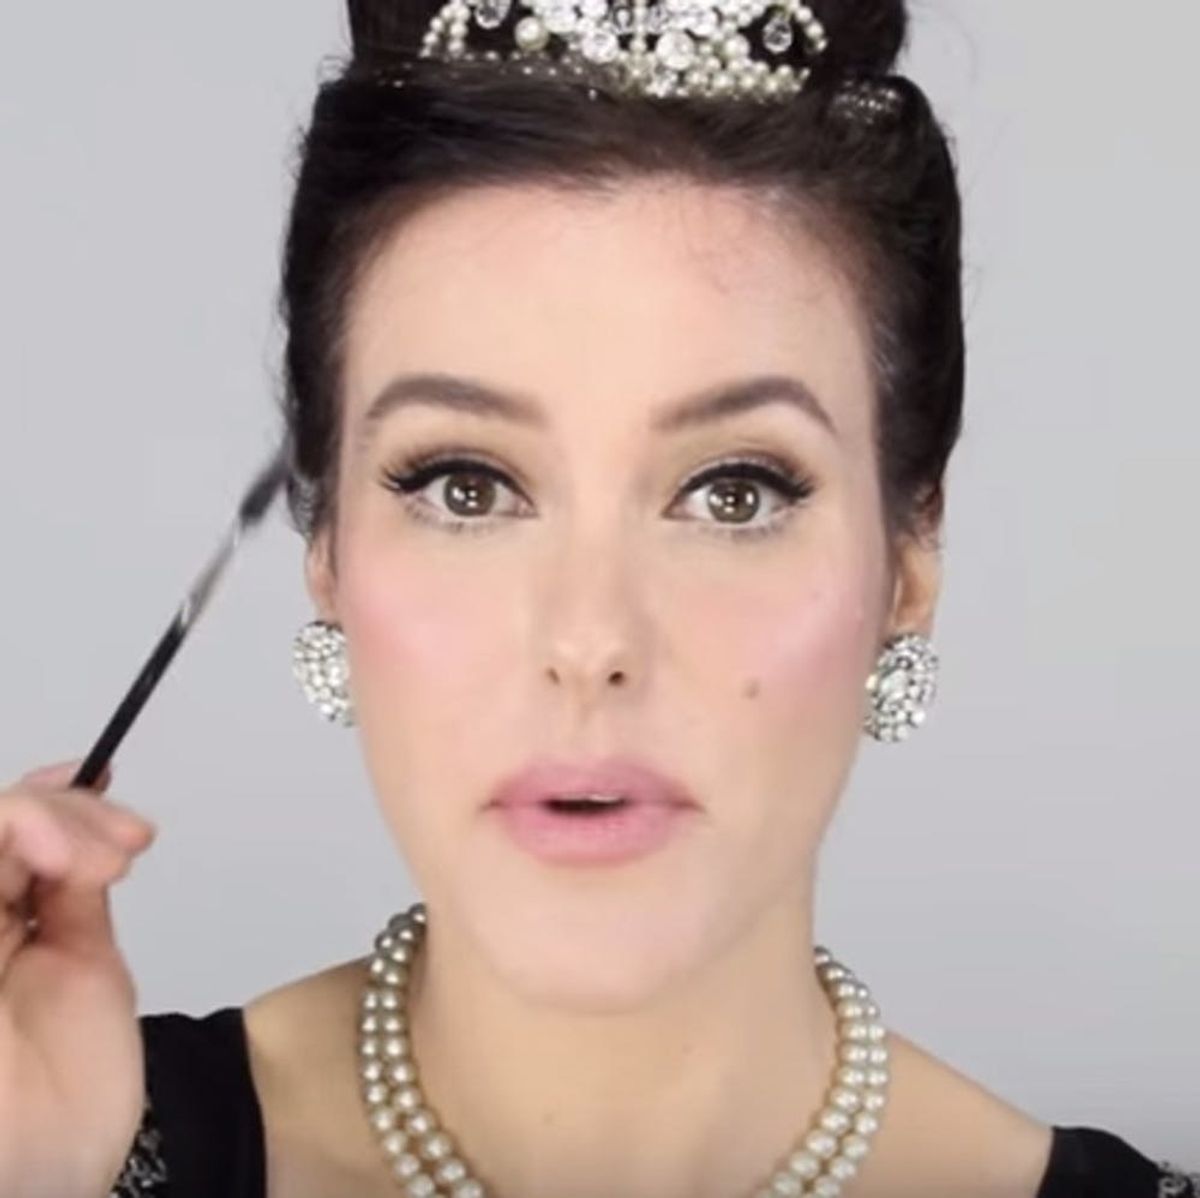 12 Makeup Tutorials Inspired by Your Favorite Movie Characters - Brit + Co